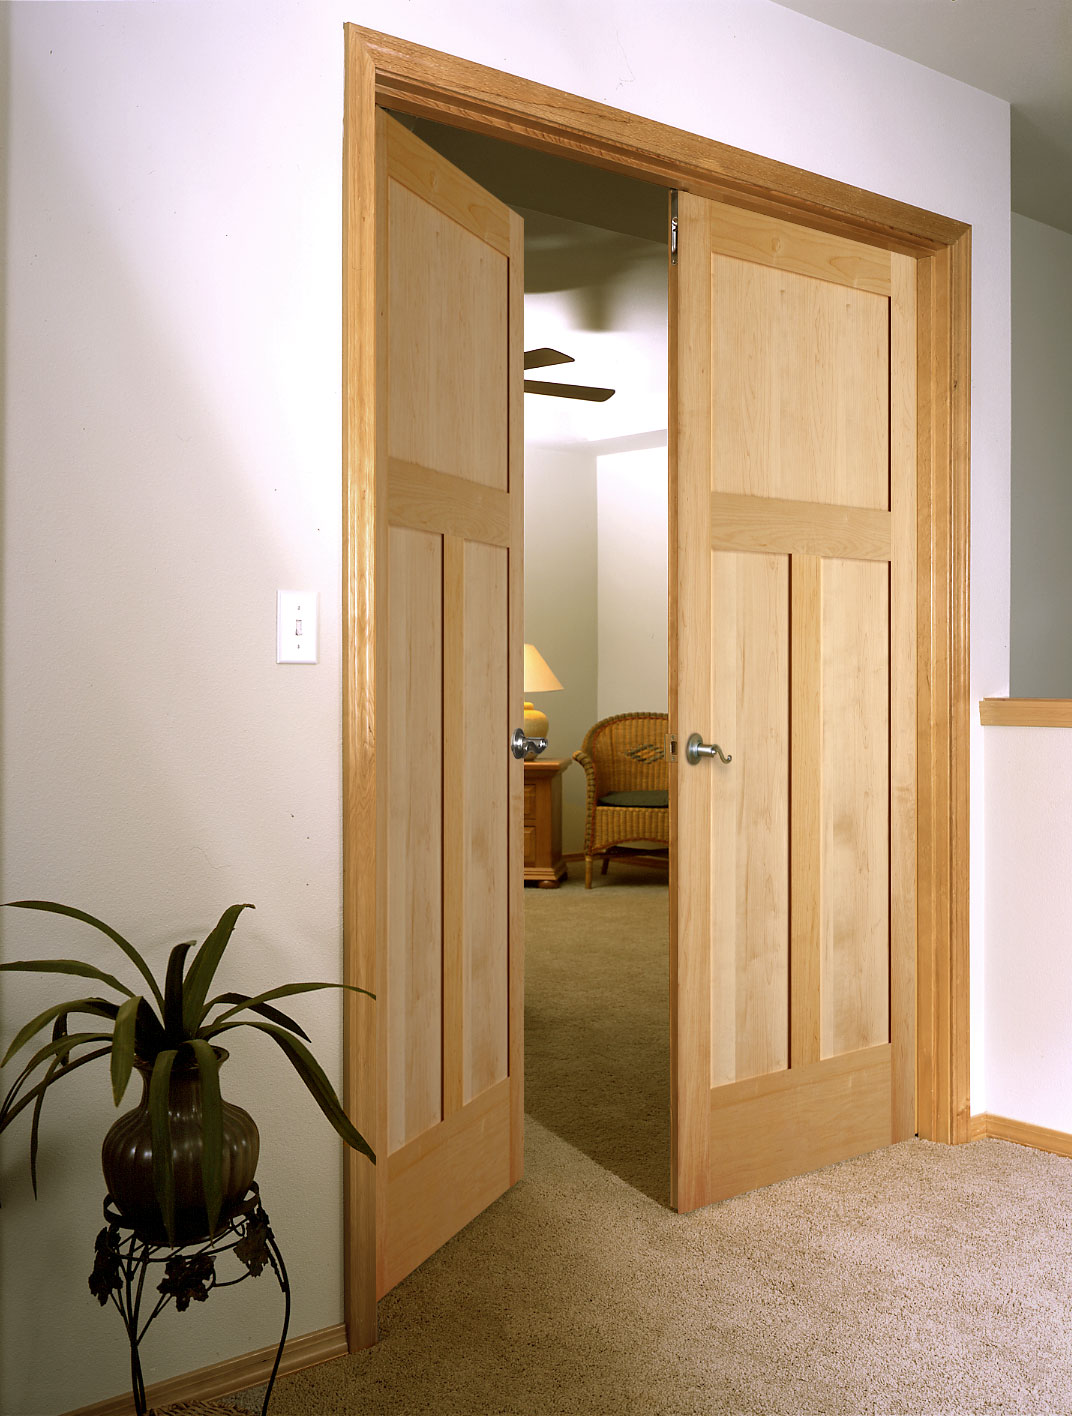 Natural Interior Applying Inspiring Natural Interior Wood Doors Applying Silver Knob Of Entrance Matched With White Wall Color And Furnished With Vase Plants Decorations Interior Design The Possible Combination Of The Interior Wood Doors